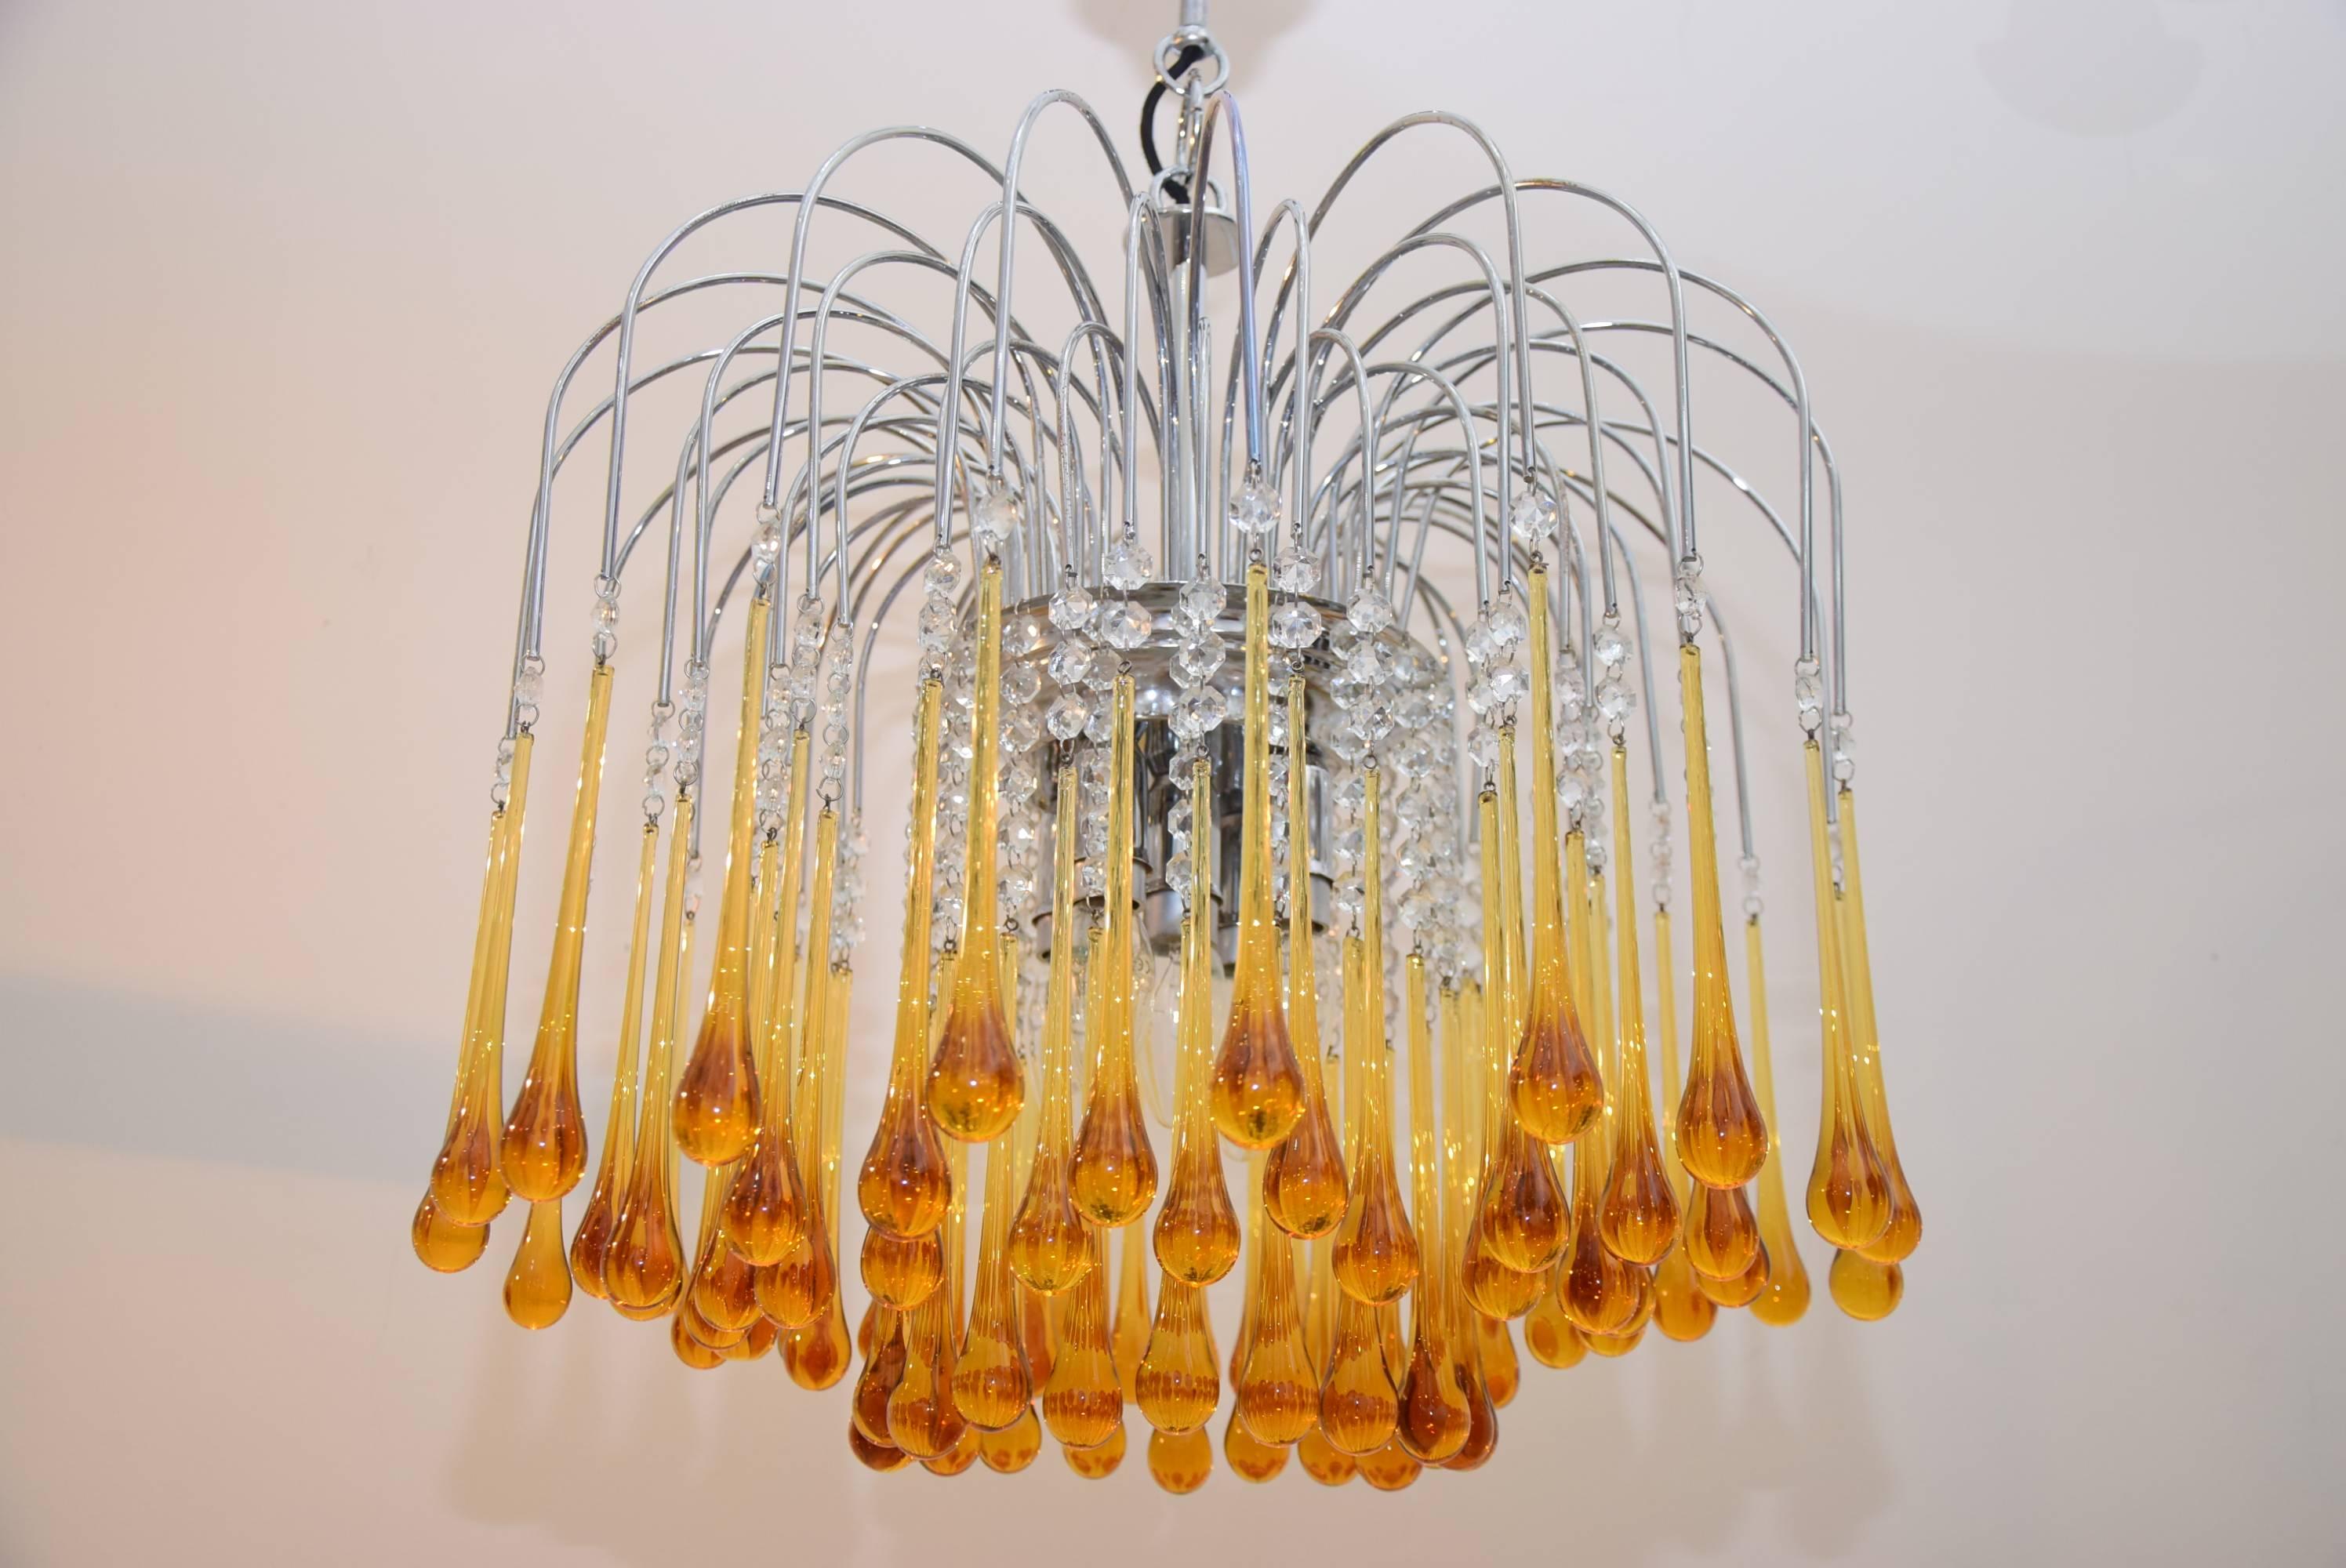 Two Murano chandelier in the style of Venini, 1960s.
Wonderful fountain of light.
2 are available, priced and sold per piece.

